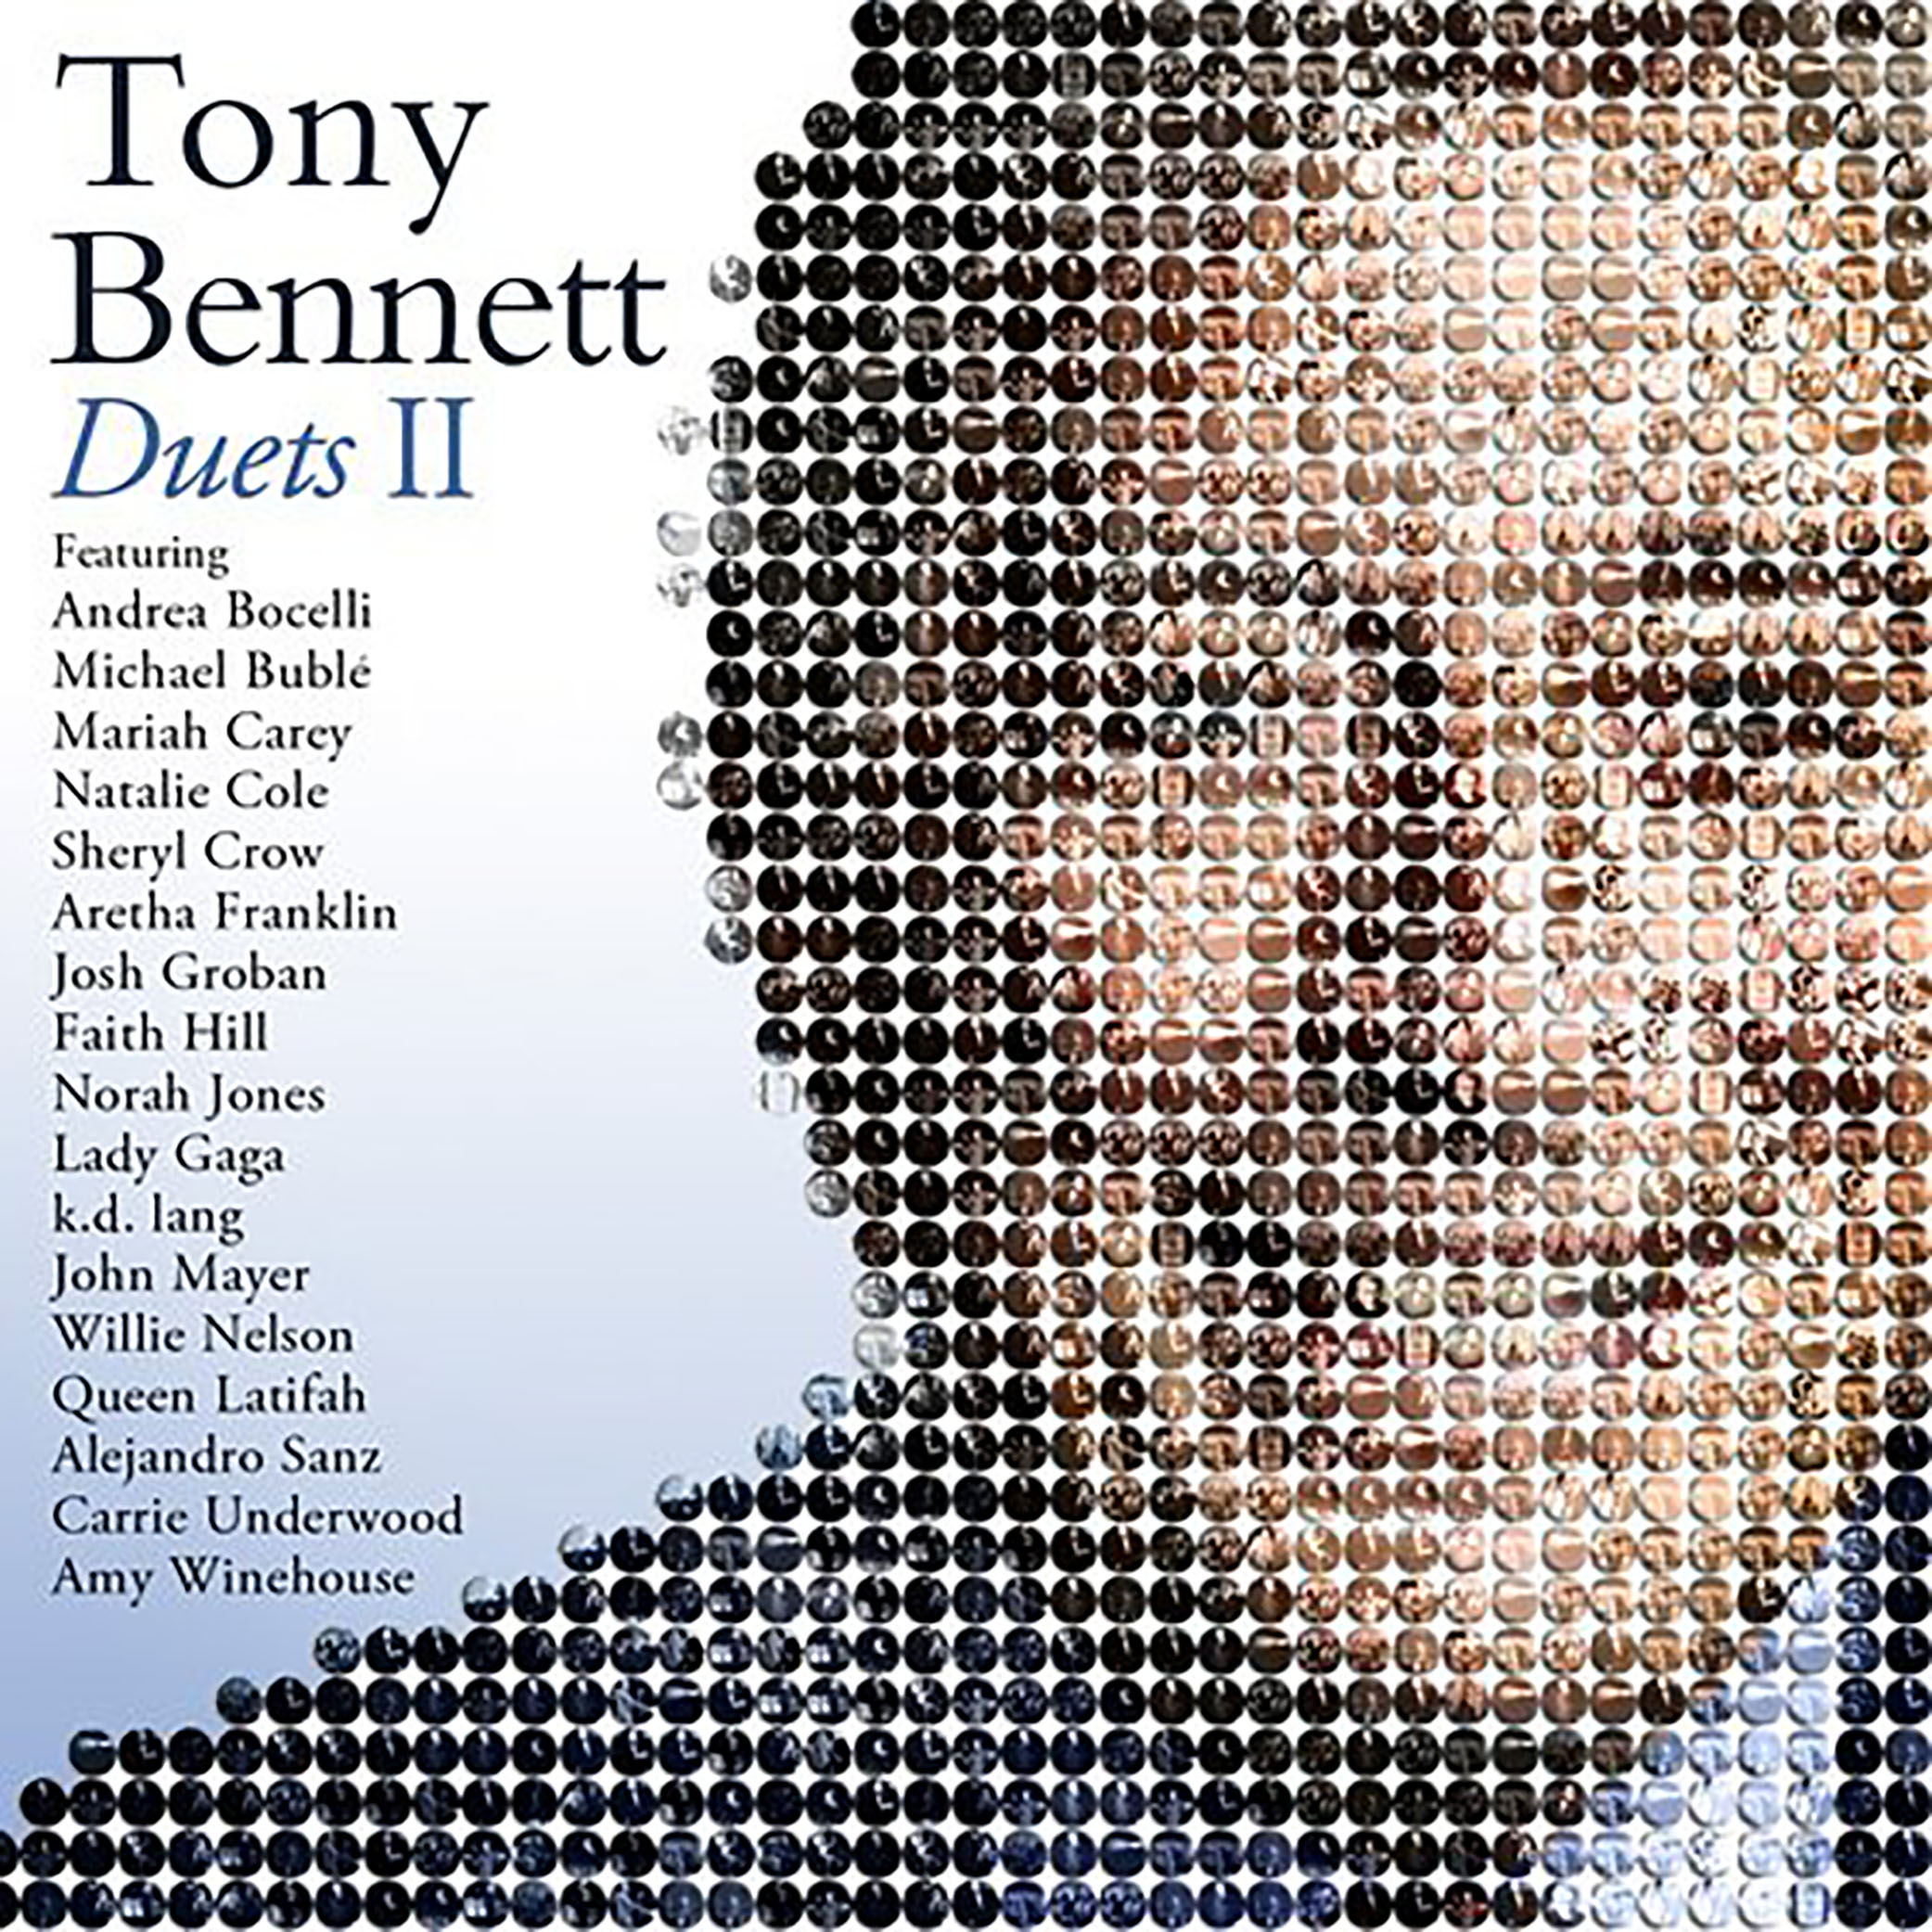 「When You Wish Upon a Star」収録アルバム『デュエッツII』／Jackie duet with Tony Bennett